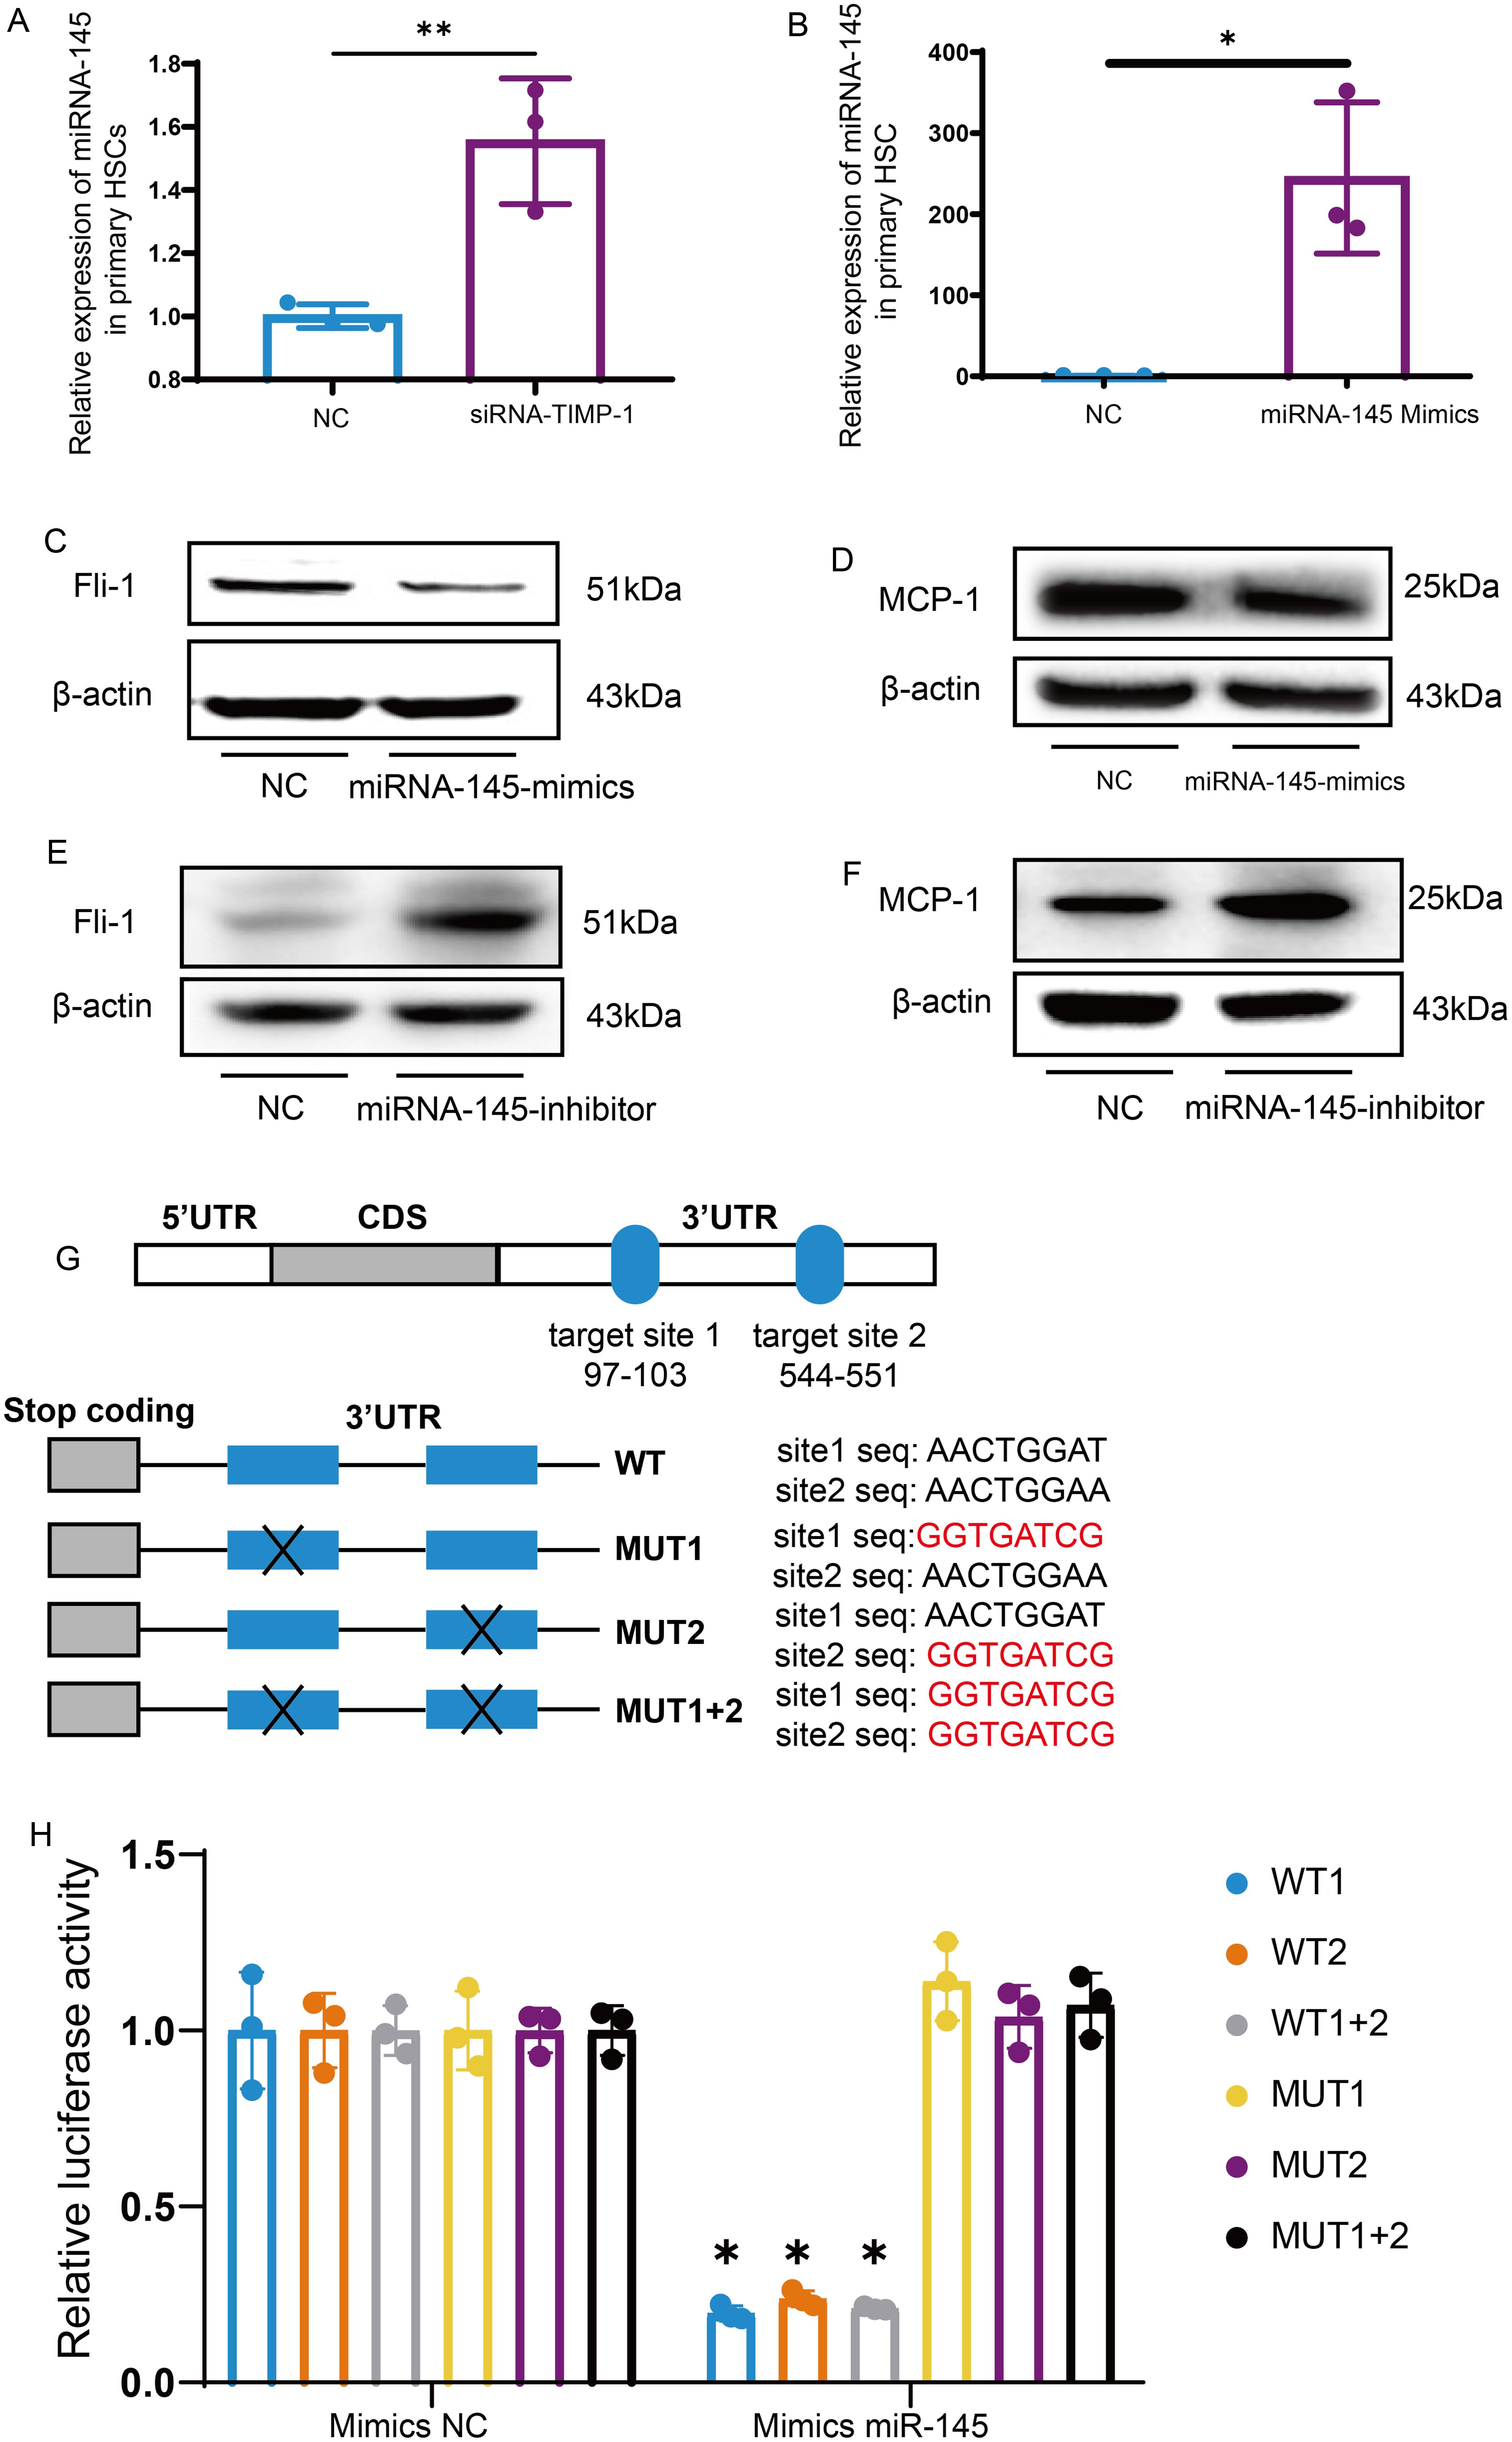 TIMP-1 regulates the expression of Fli-1 through miRNA-145 in primary HSCs.